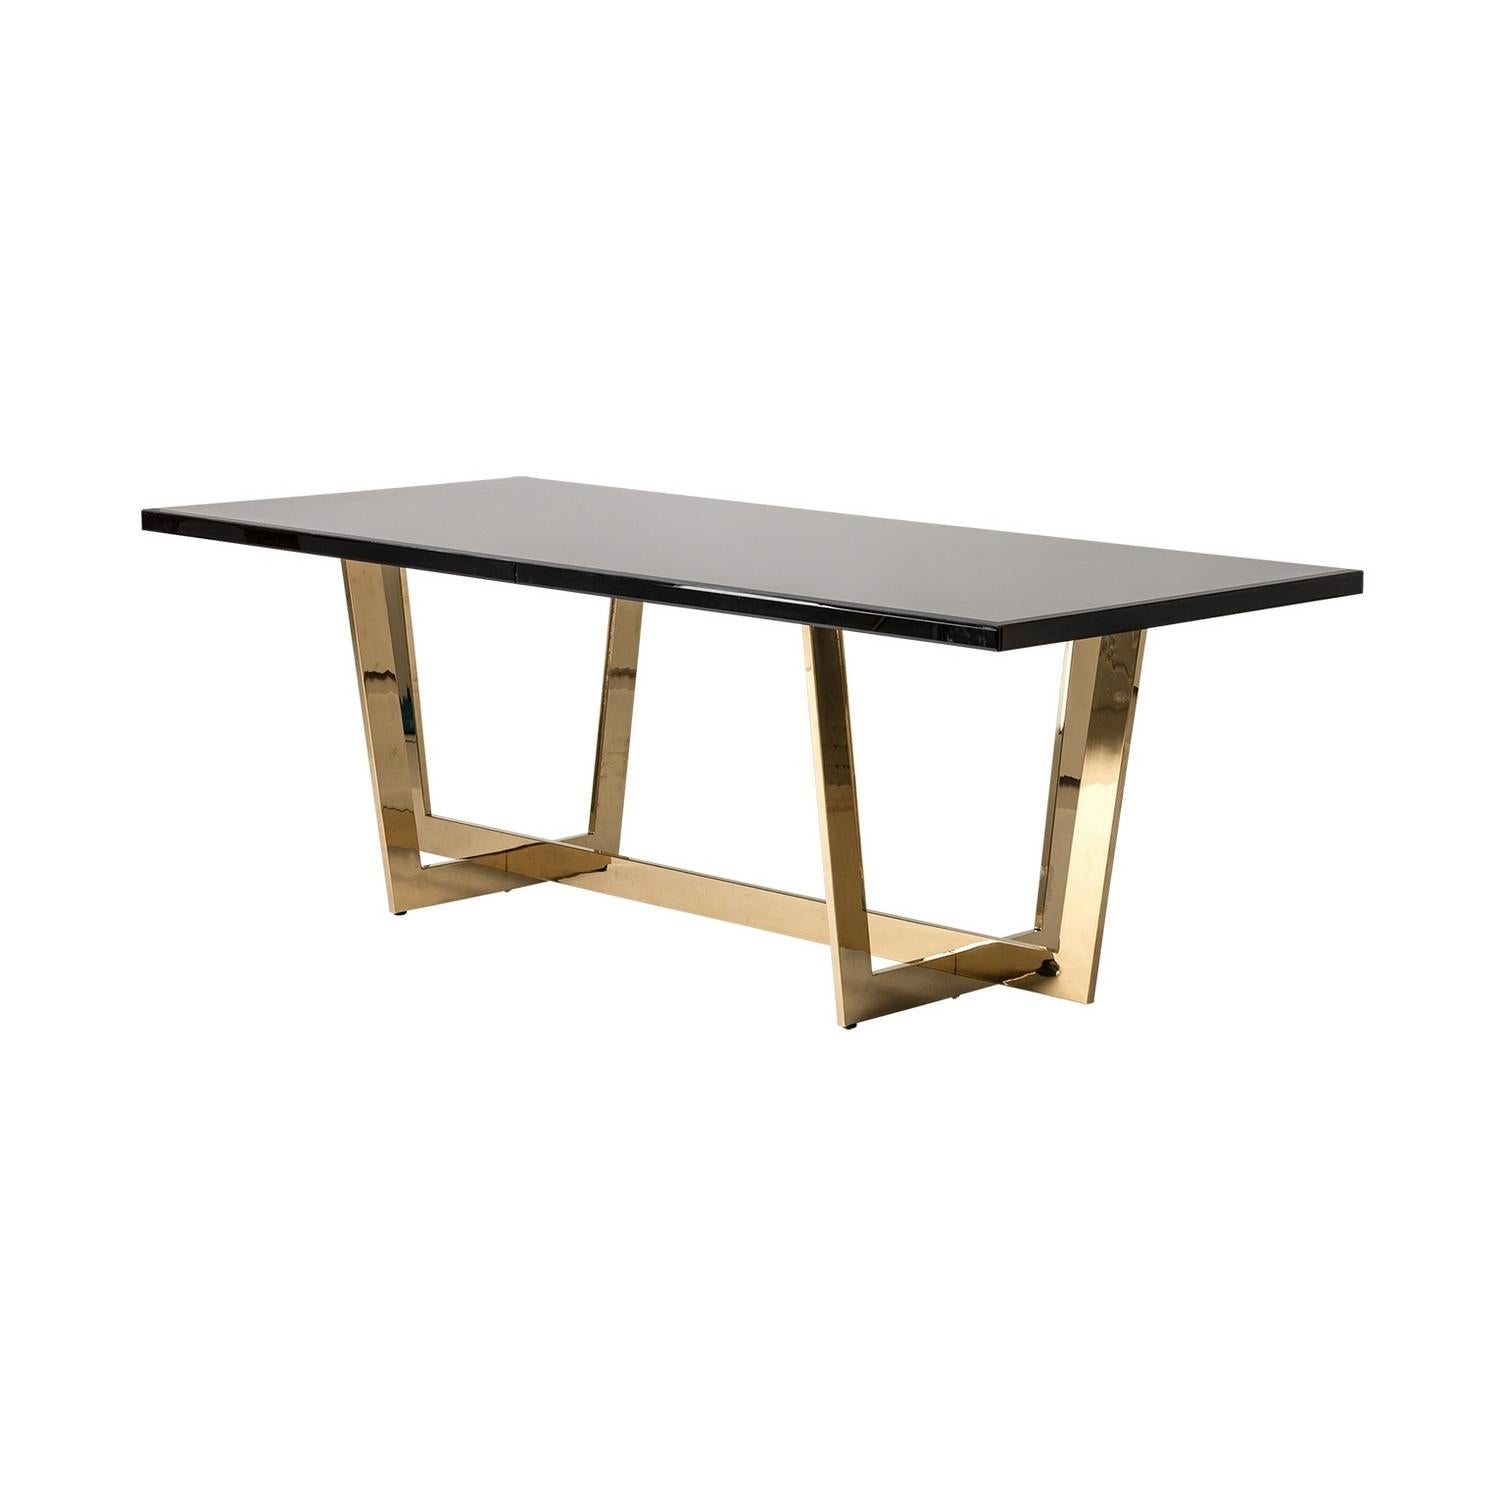 Black bevelled glass top and gilded metal graphic base rectangular dining table.